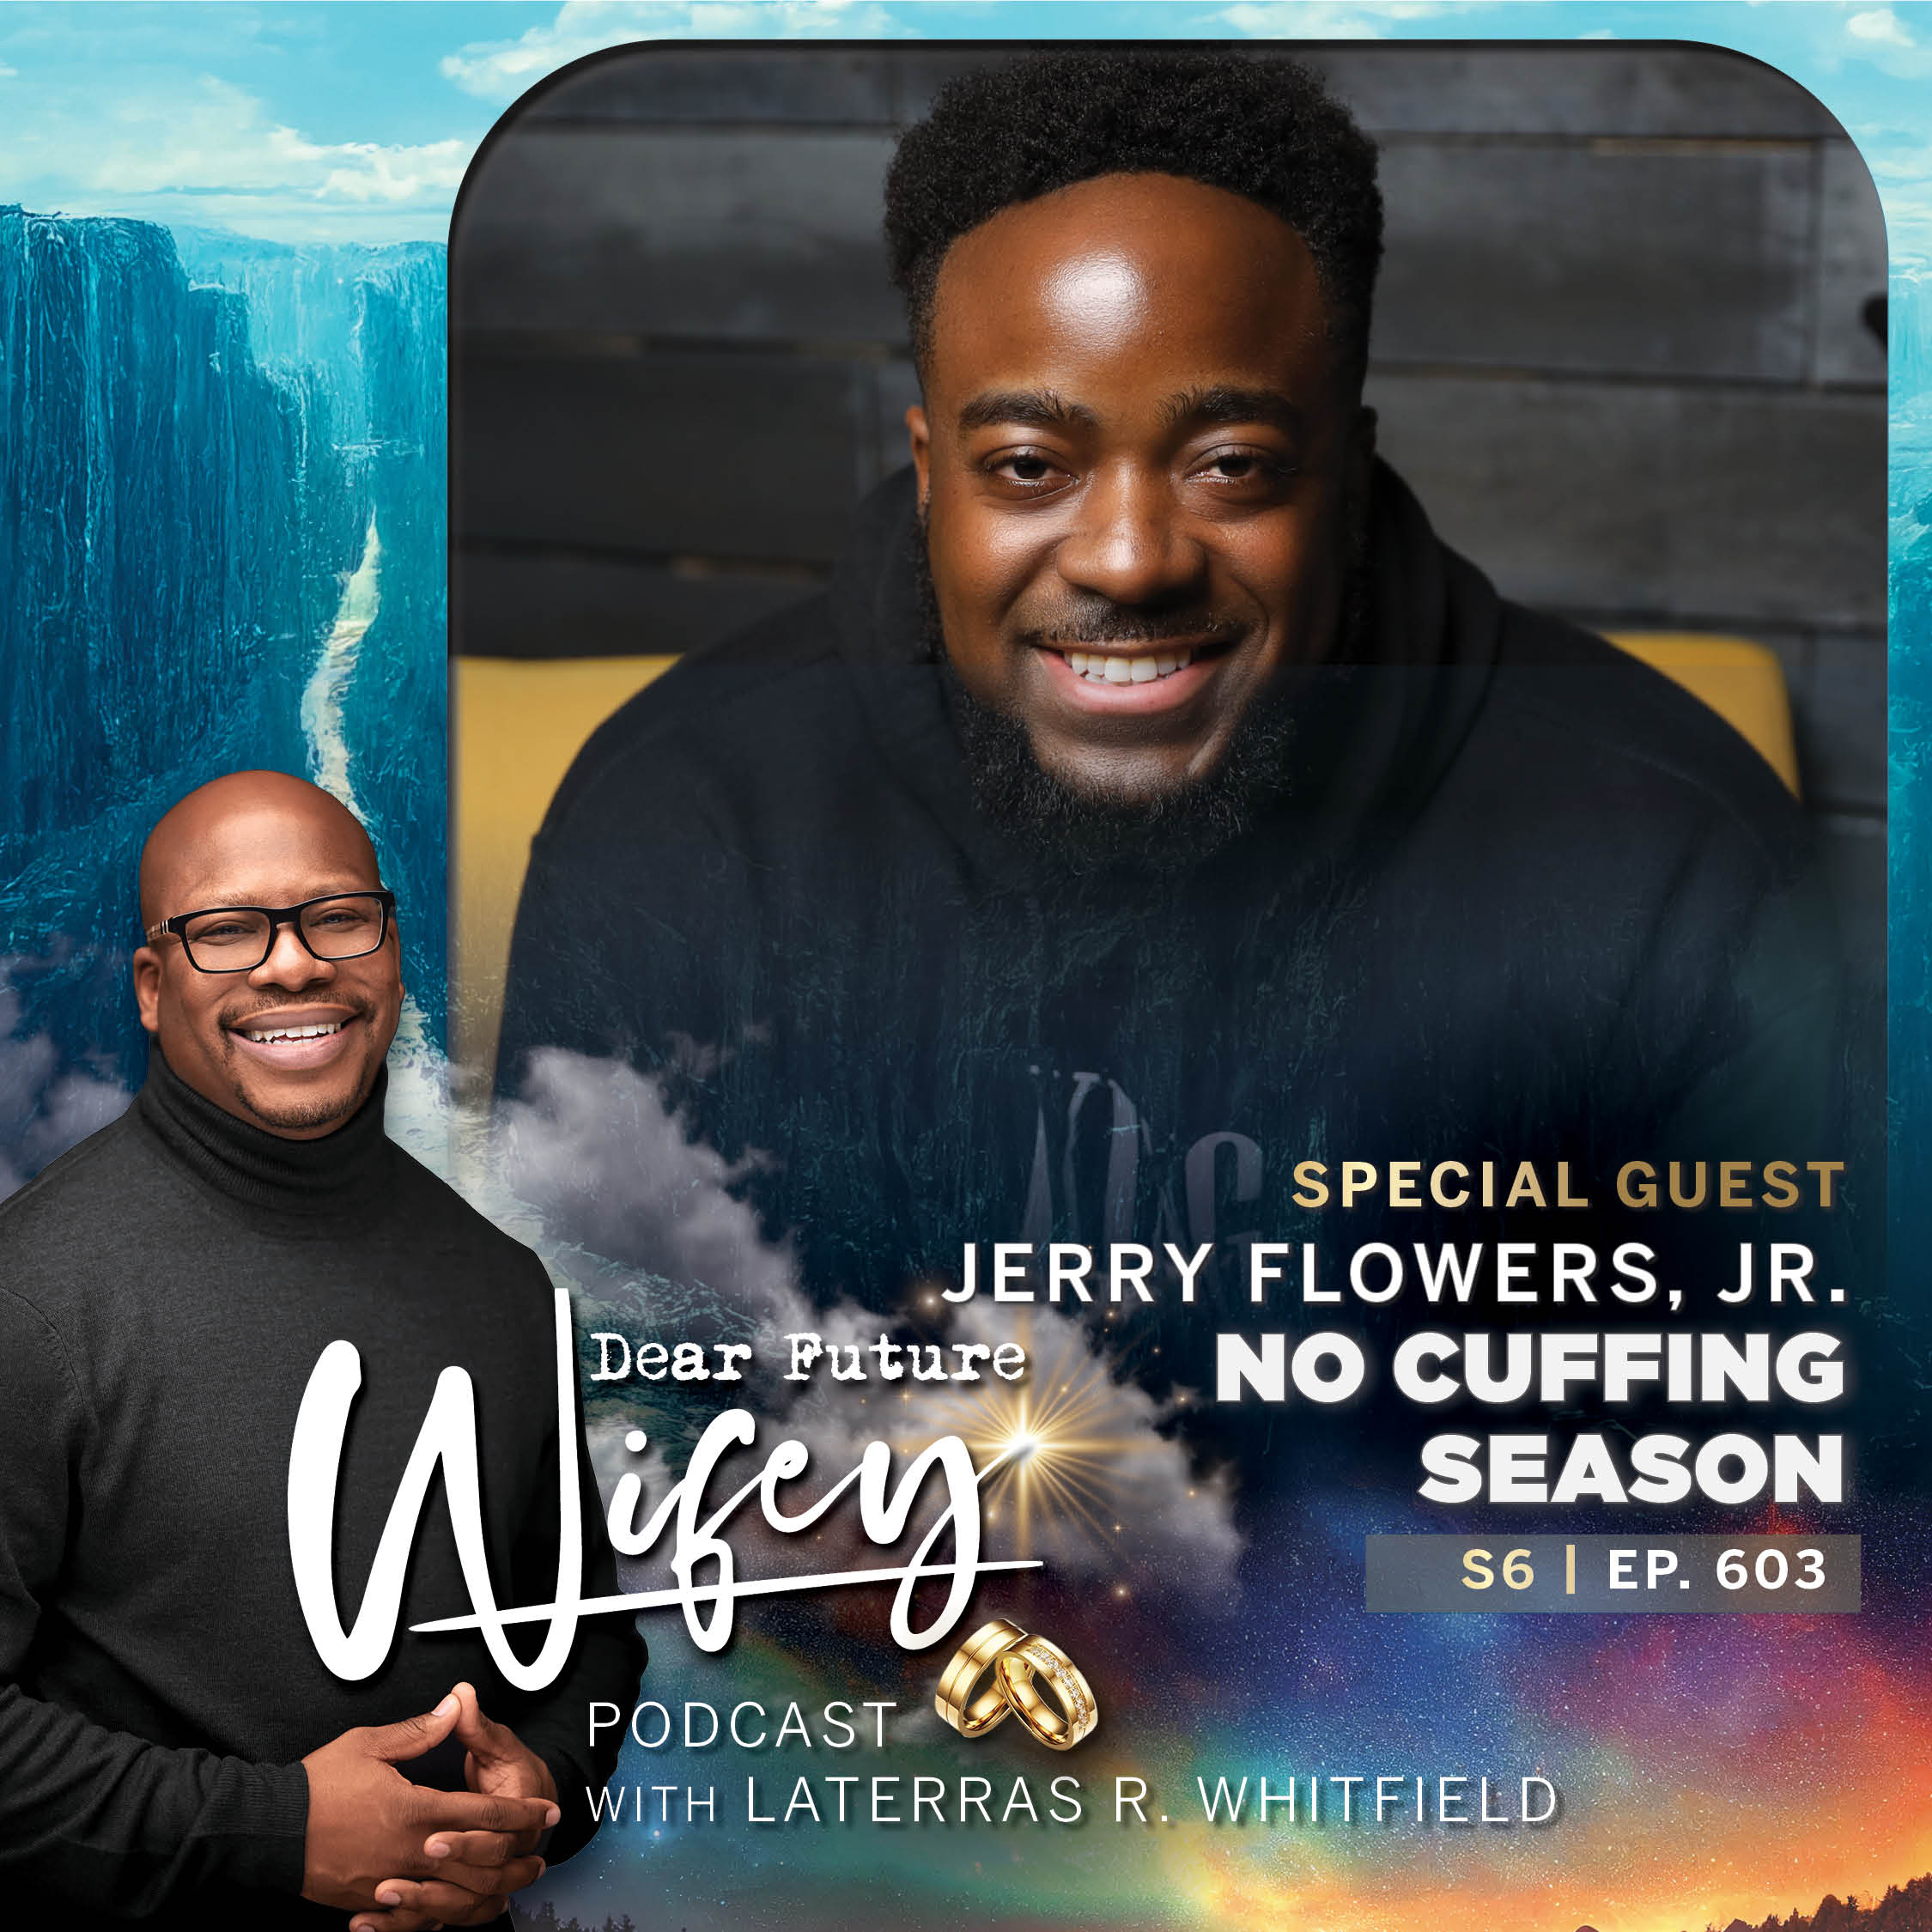 No Cuffing Season (Guest: Jerry Flowers, Jr.)